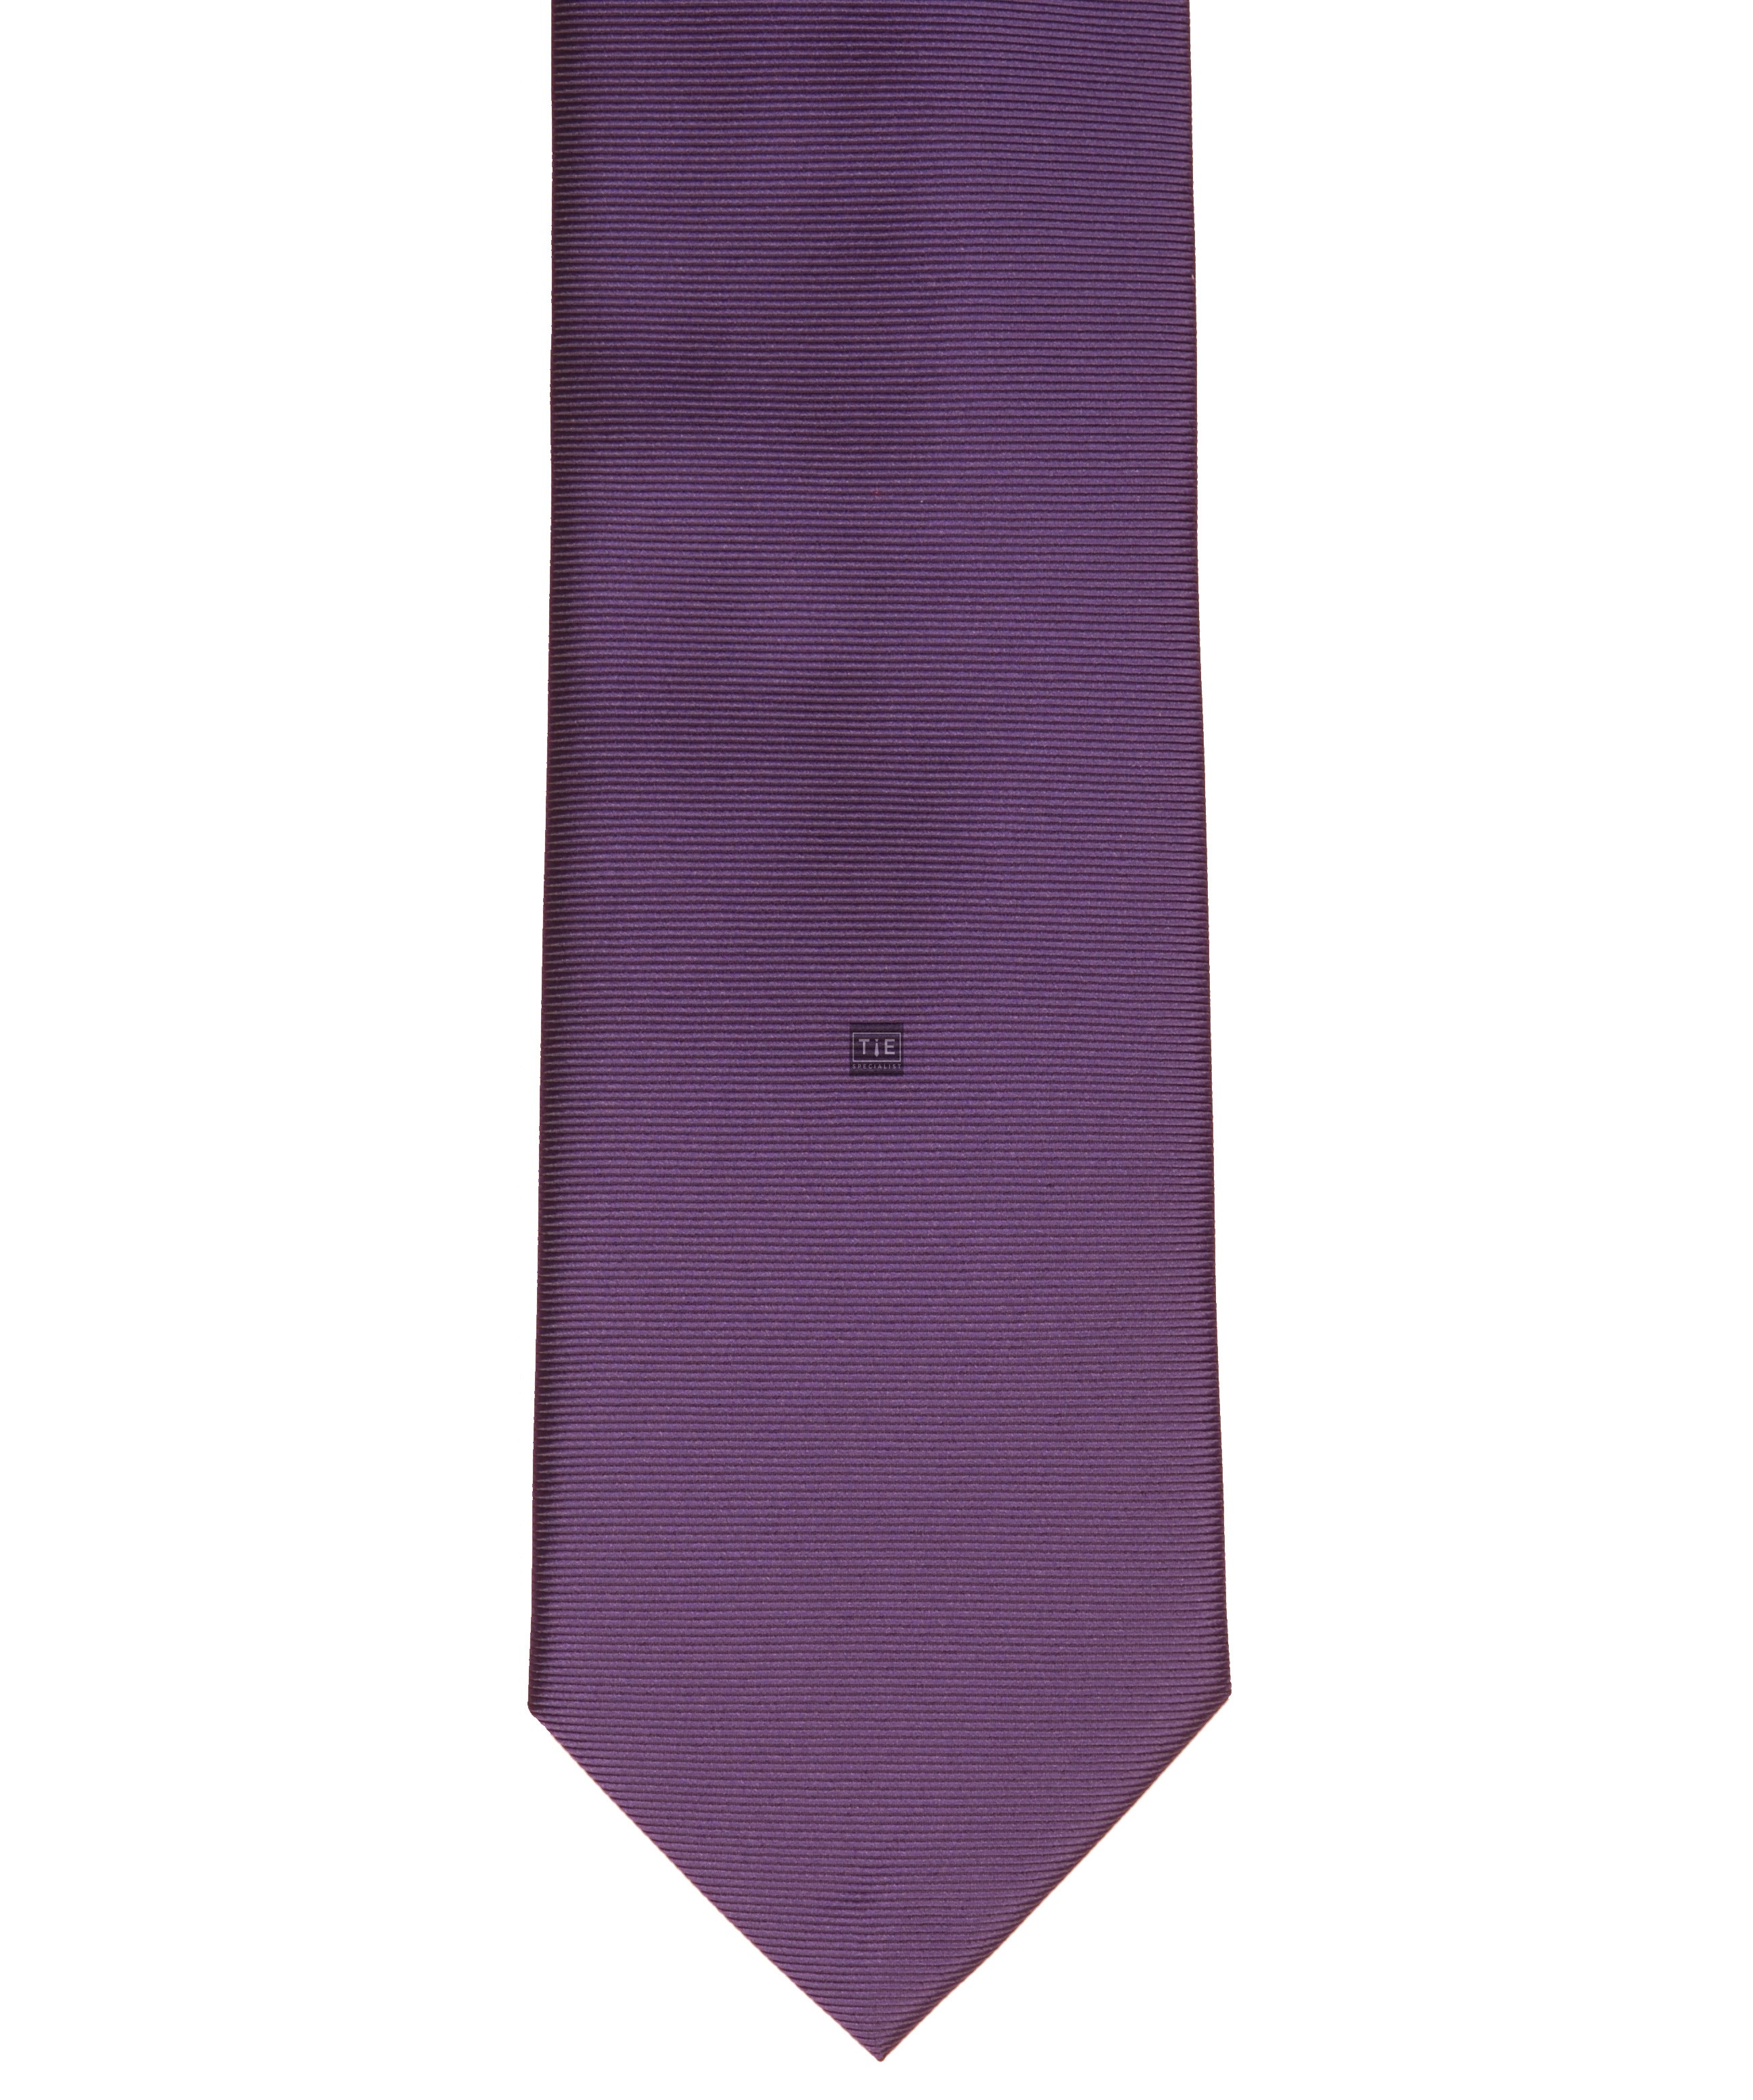 Purple Fine Twill Tie with Matching Pocket Square